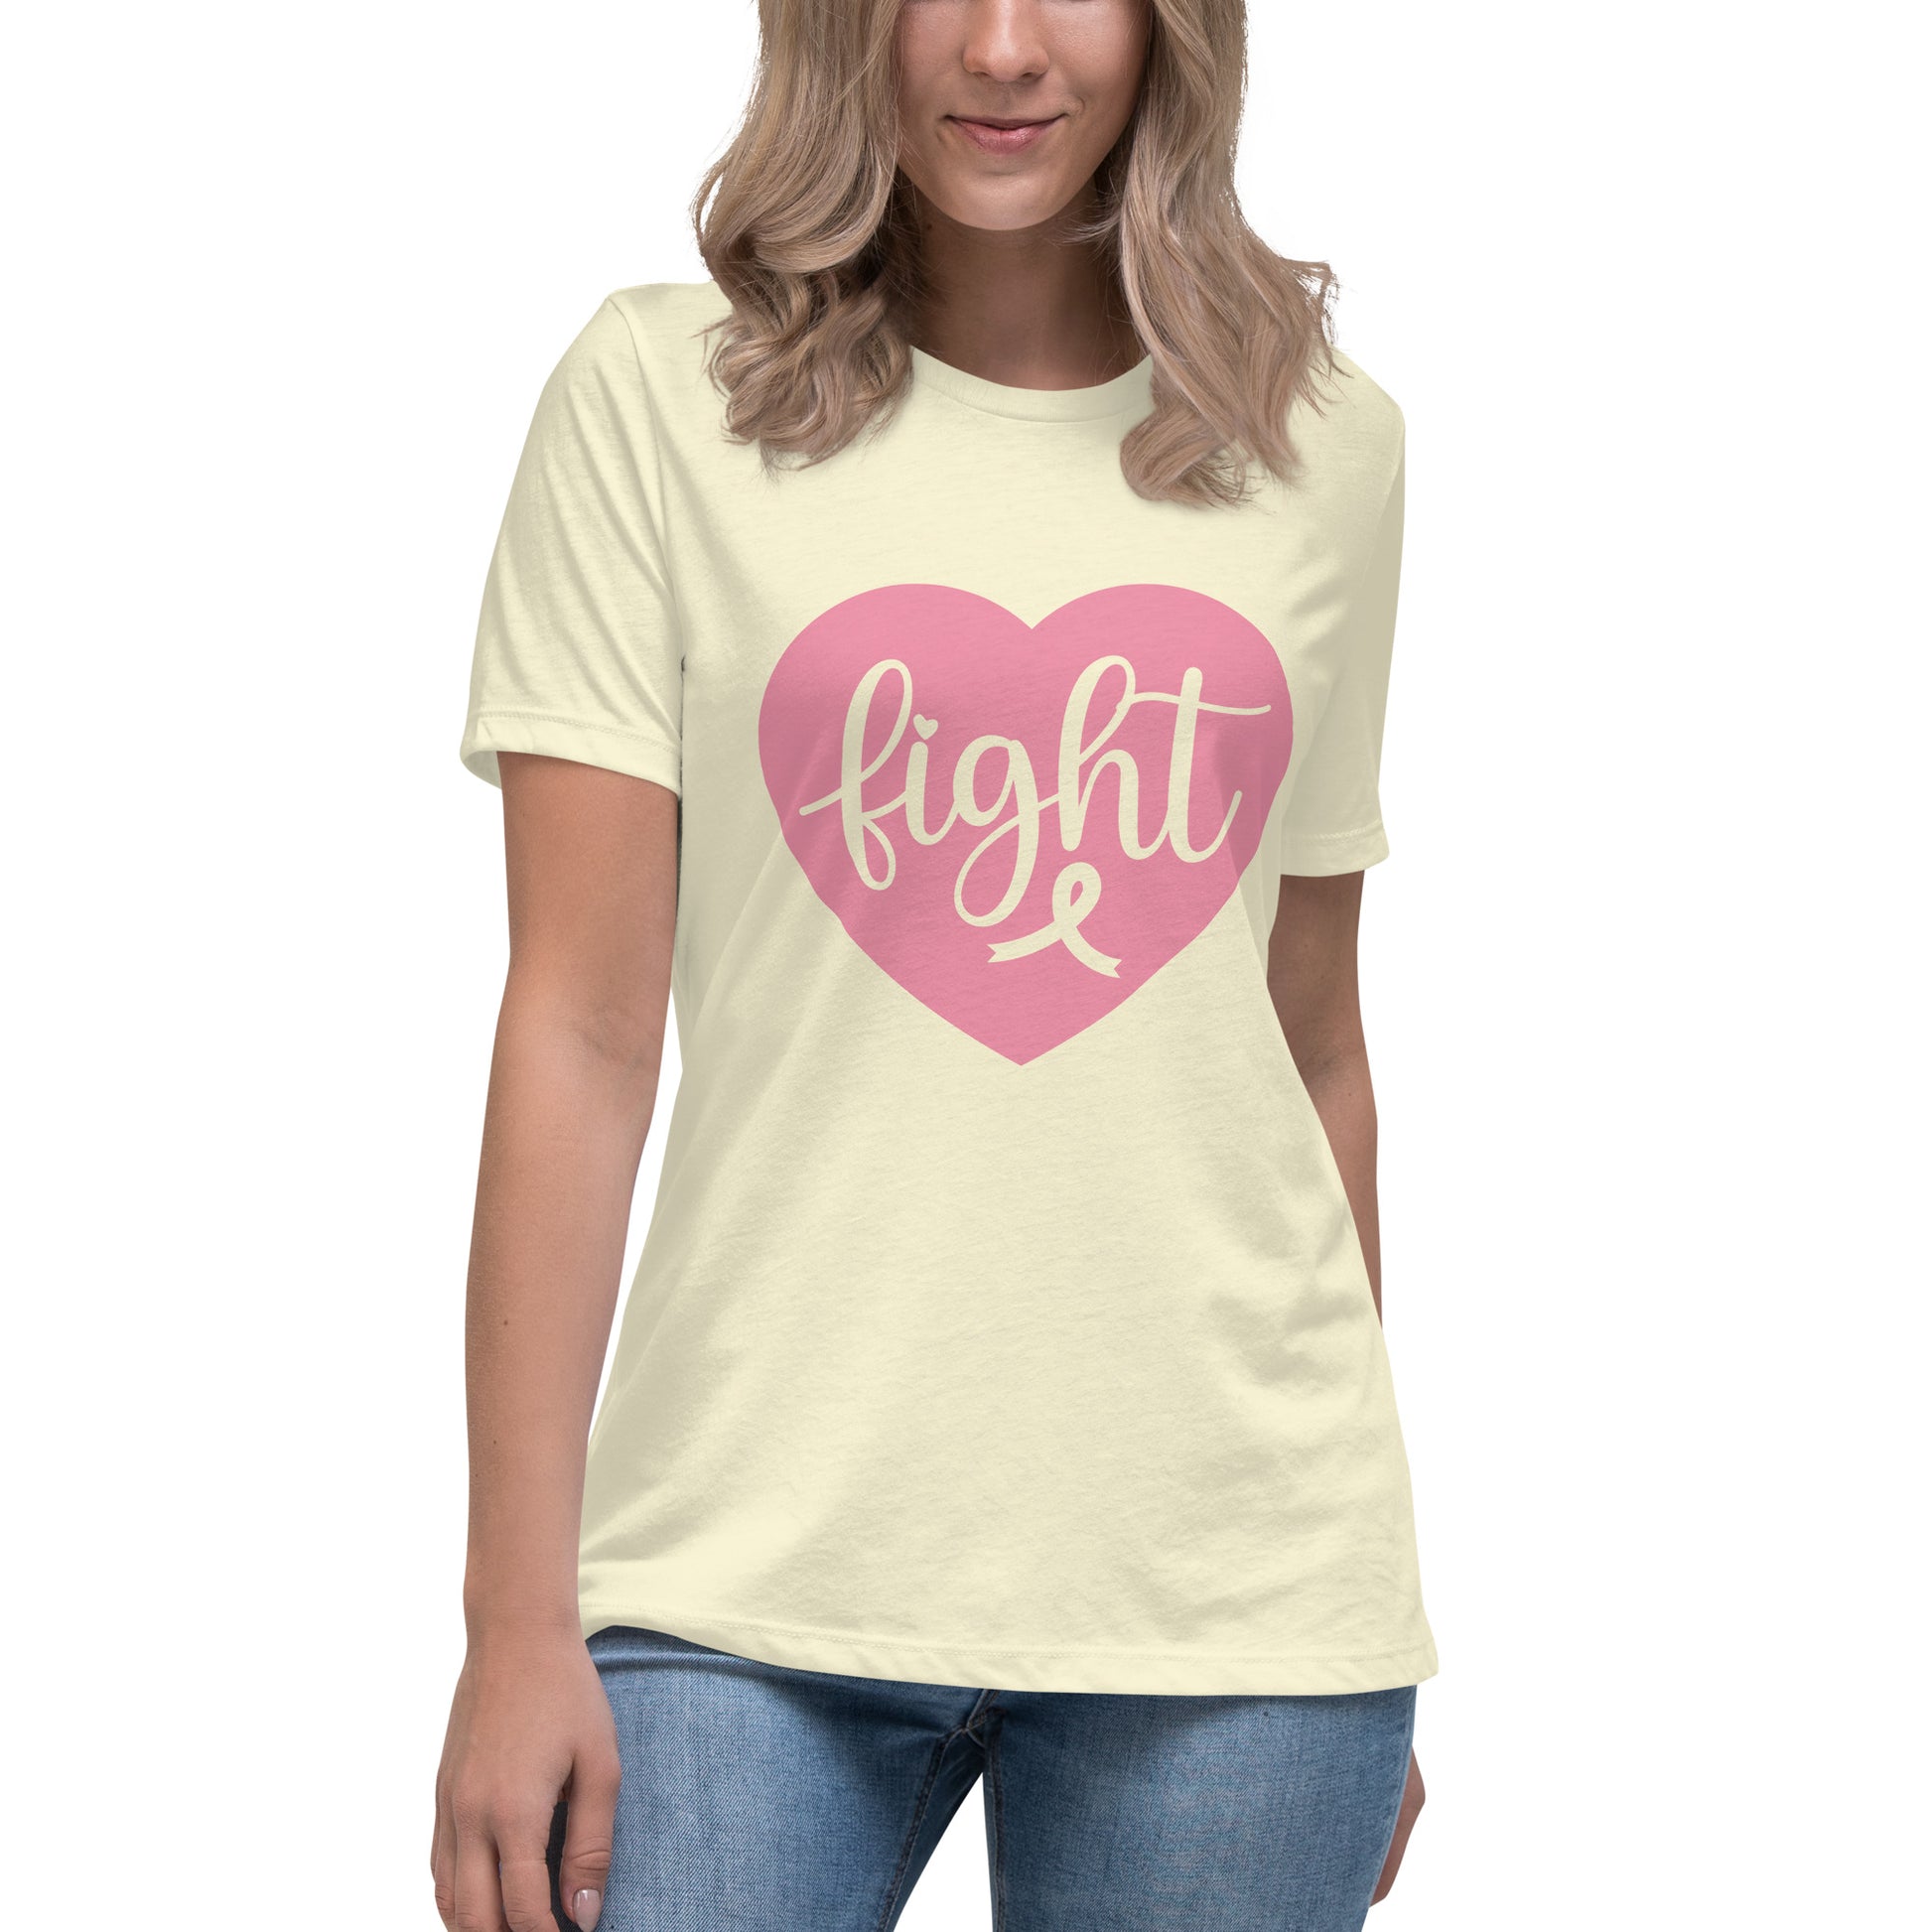 Fight Cancer Women's Relaxed T-Shirt Tee Tshirt